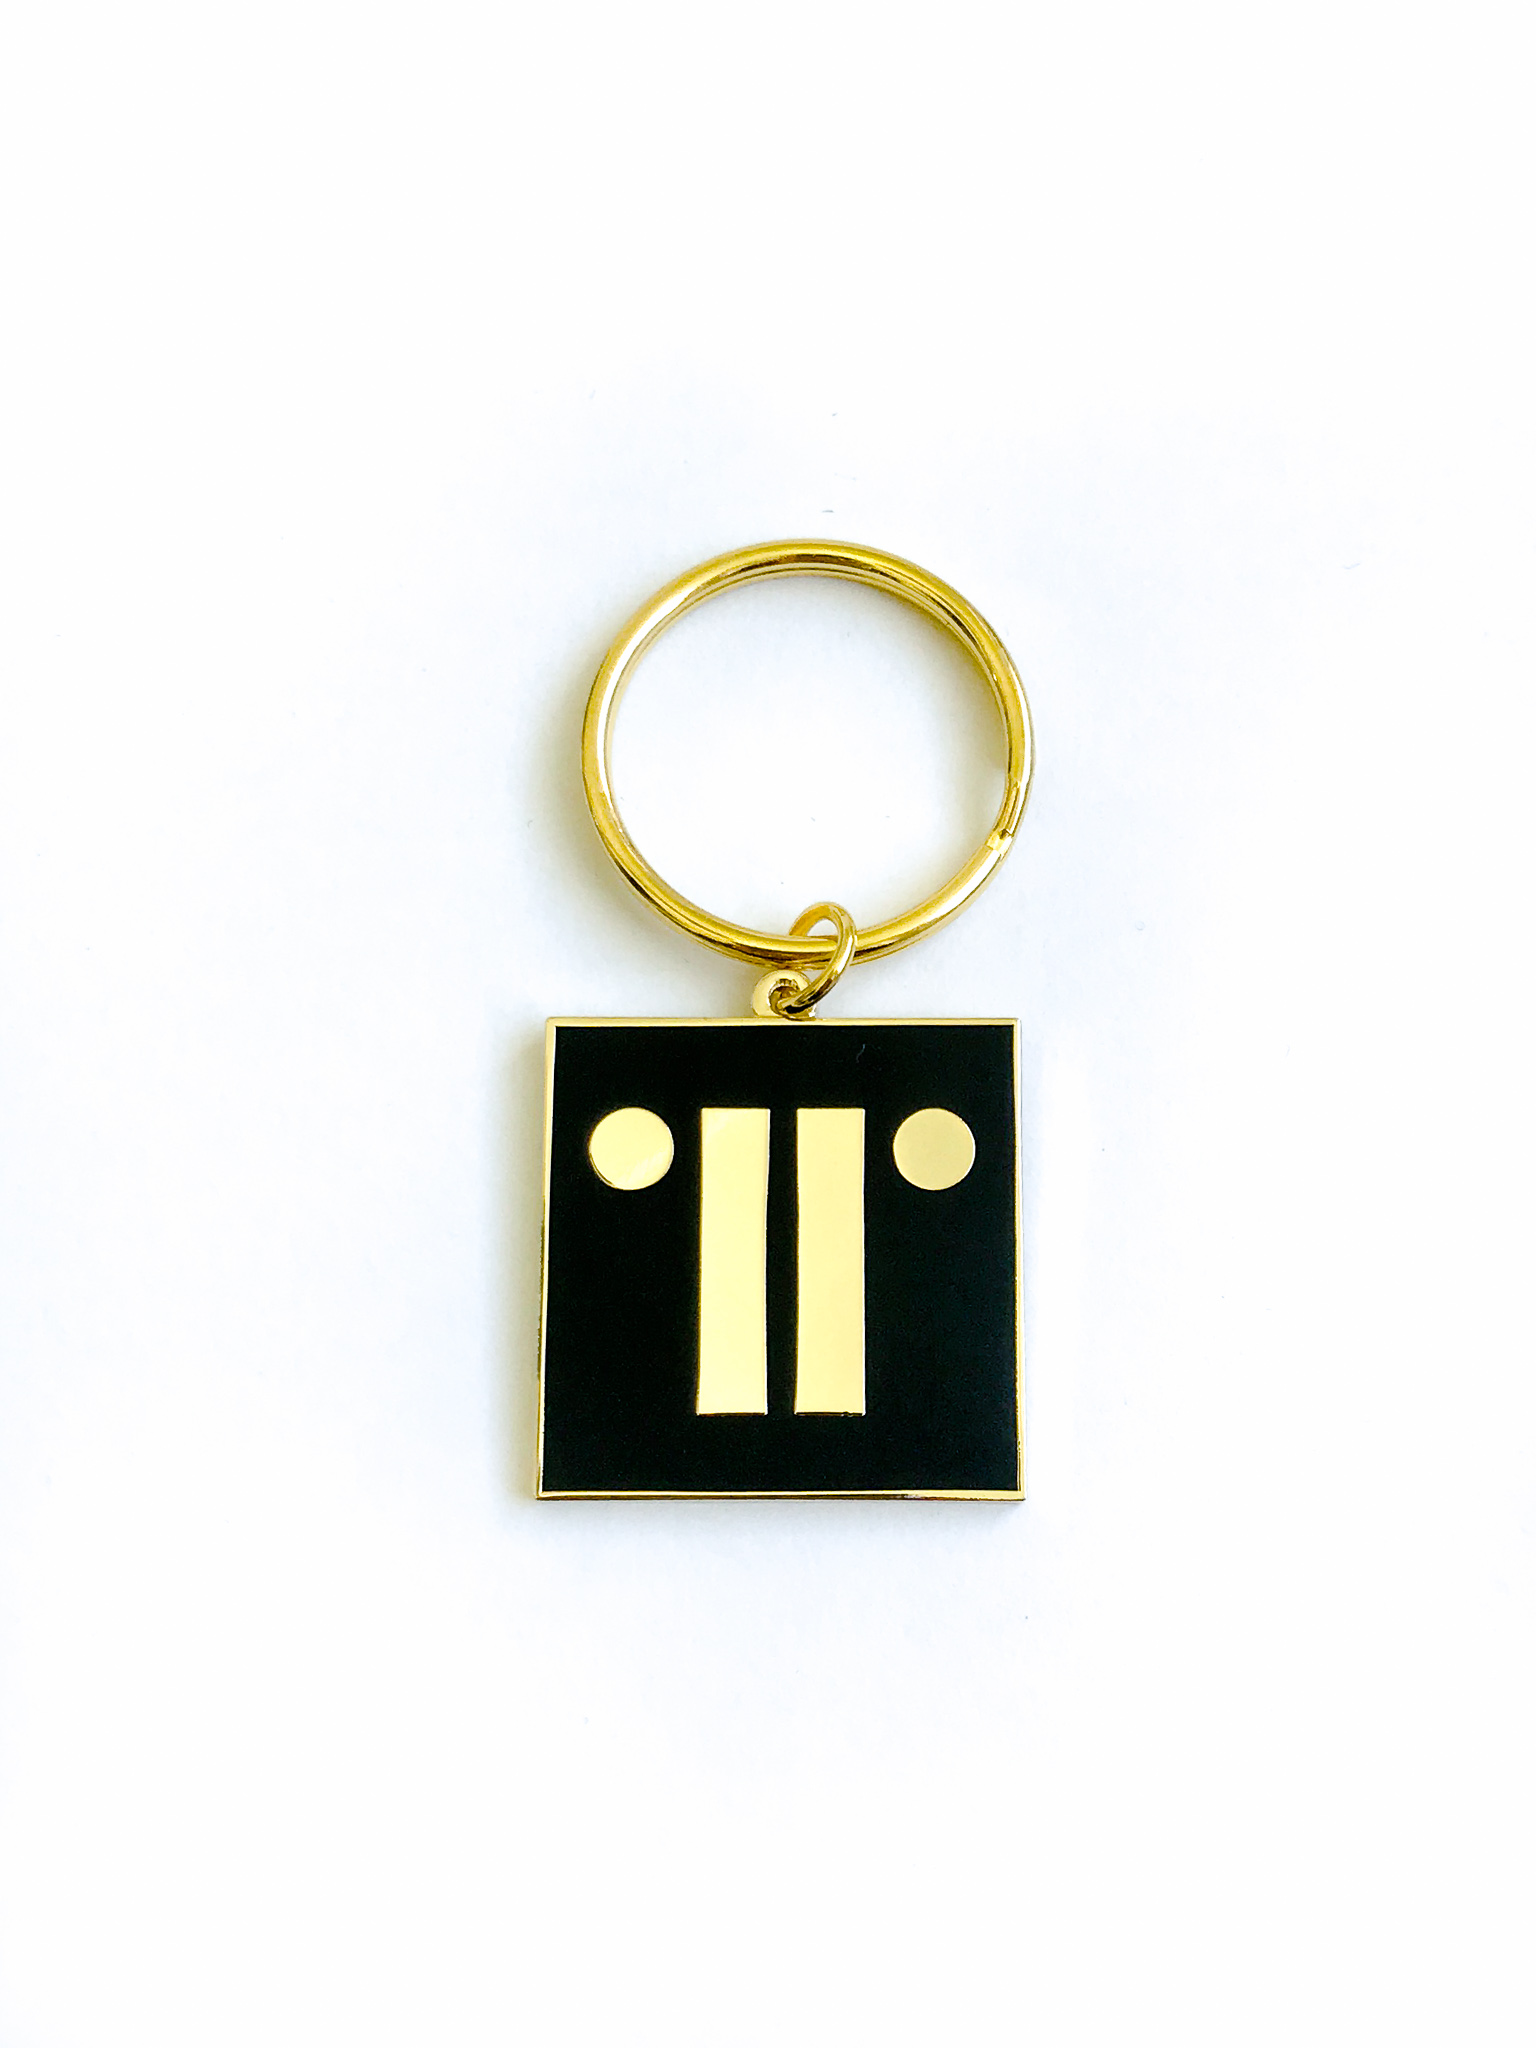 Gold keyring with black enamel paint on white background with TRG logo.